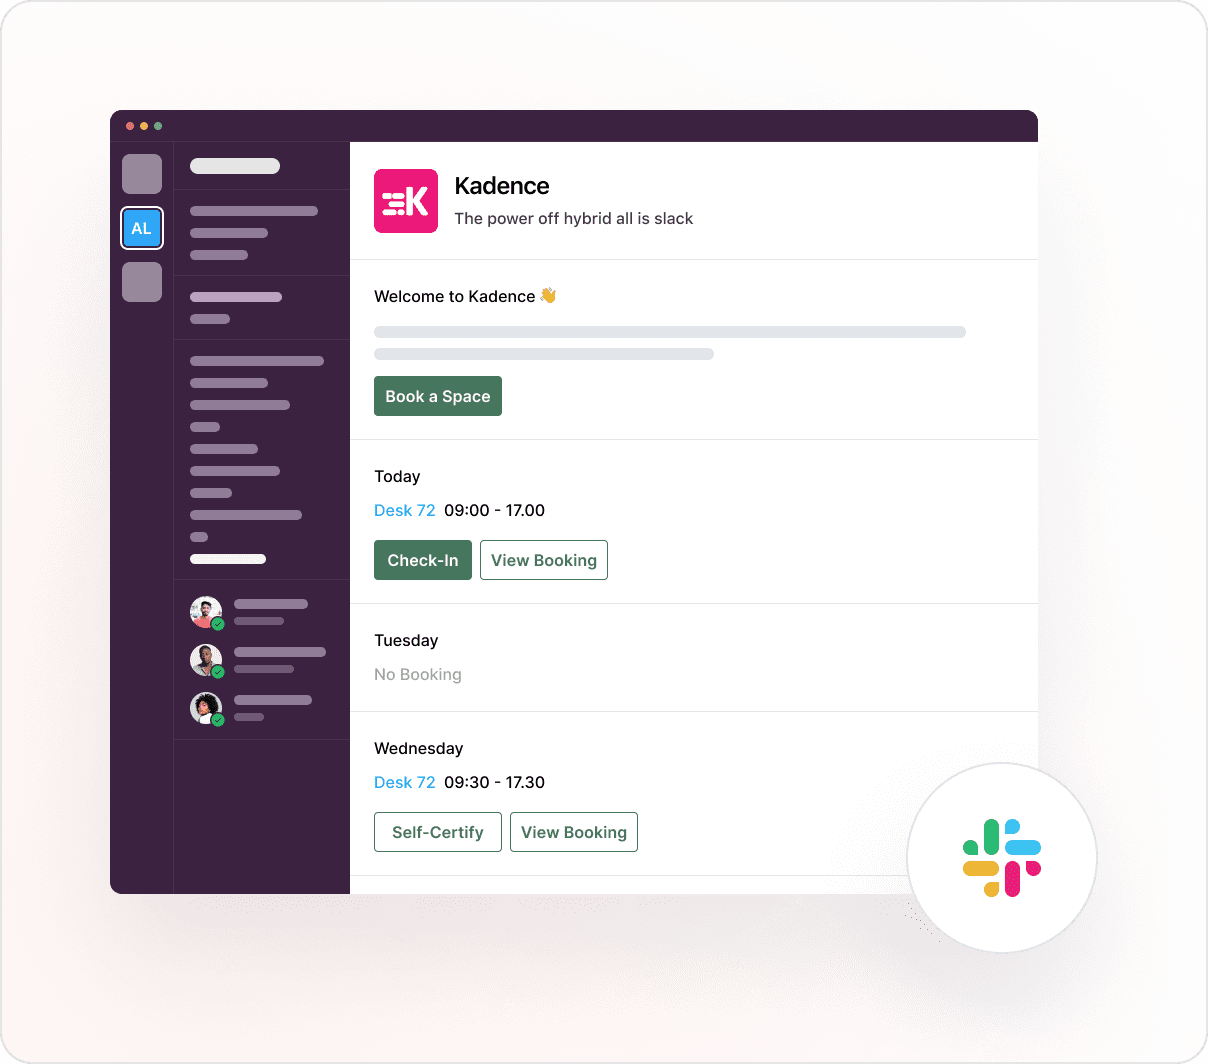 This is an image of a Slack desk booking integration for Kadence